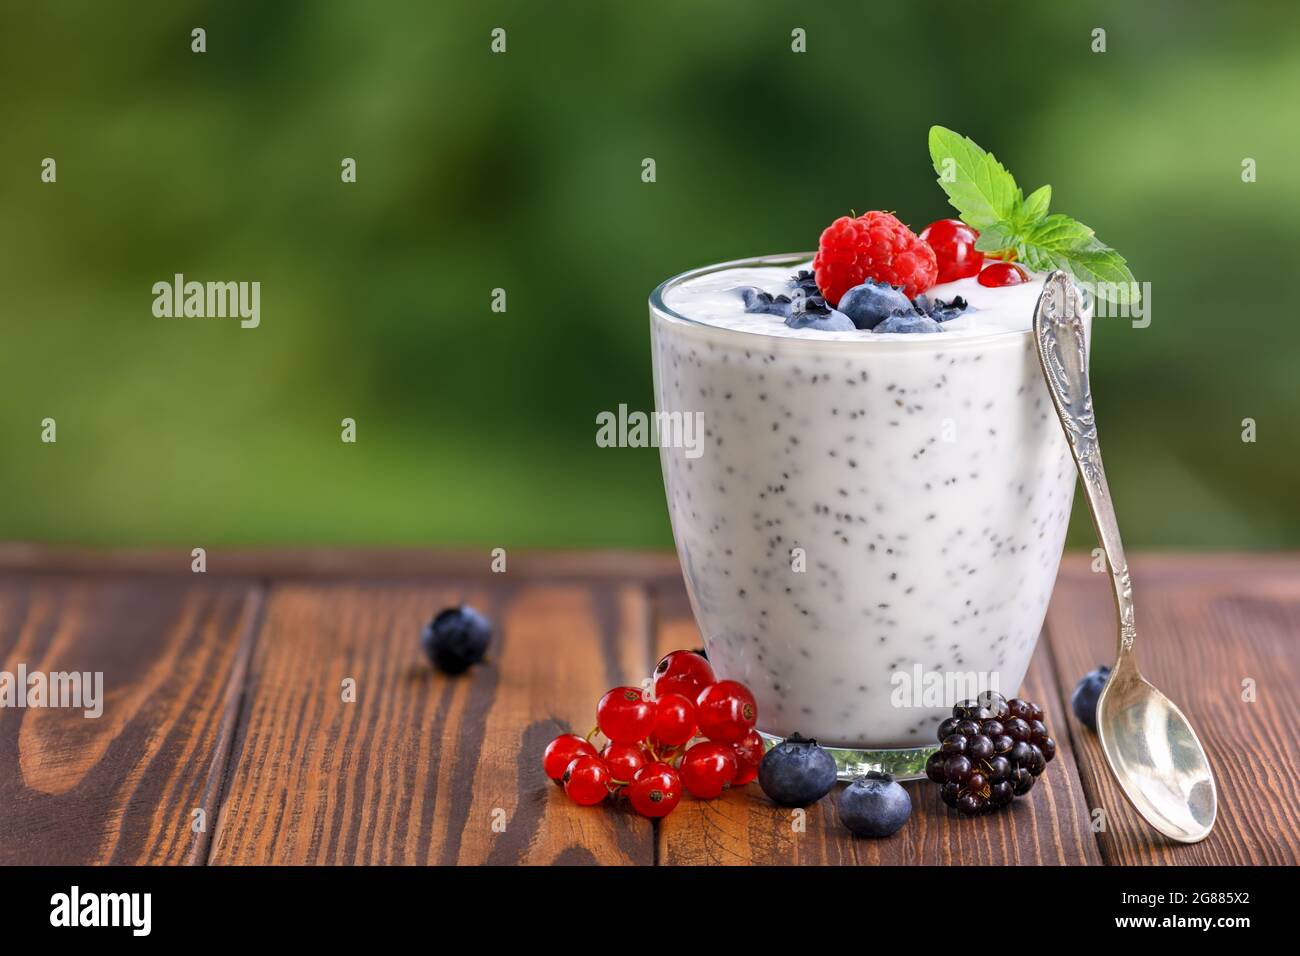 chia pudding with yogurt and fresh berries in glass on table outdoors Stock Photo